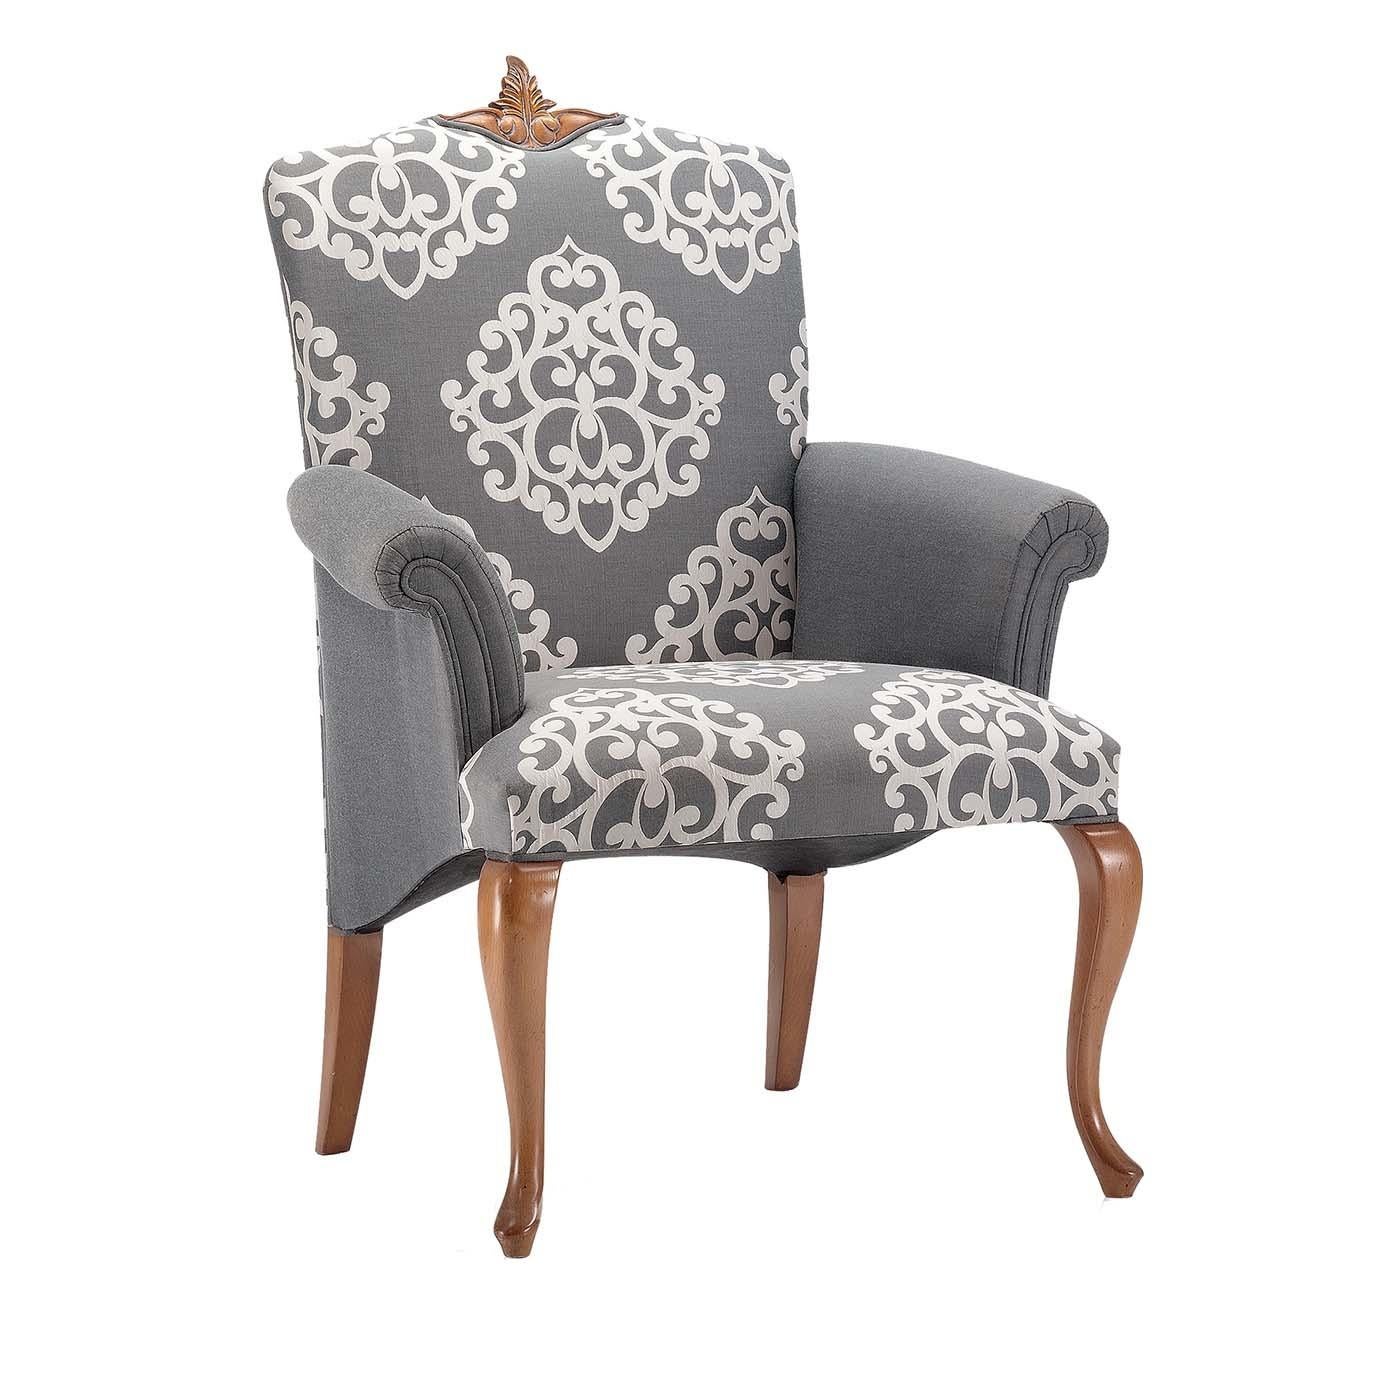 Italian Gray Damask Chair with Armrests